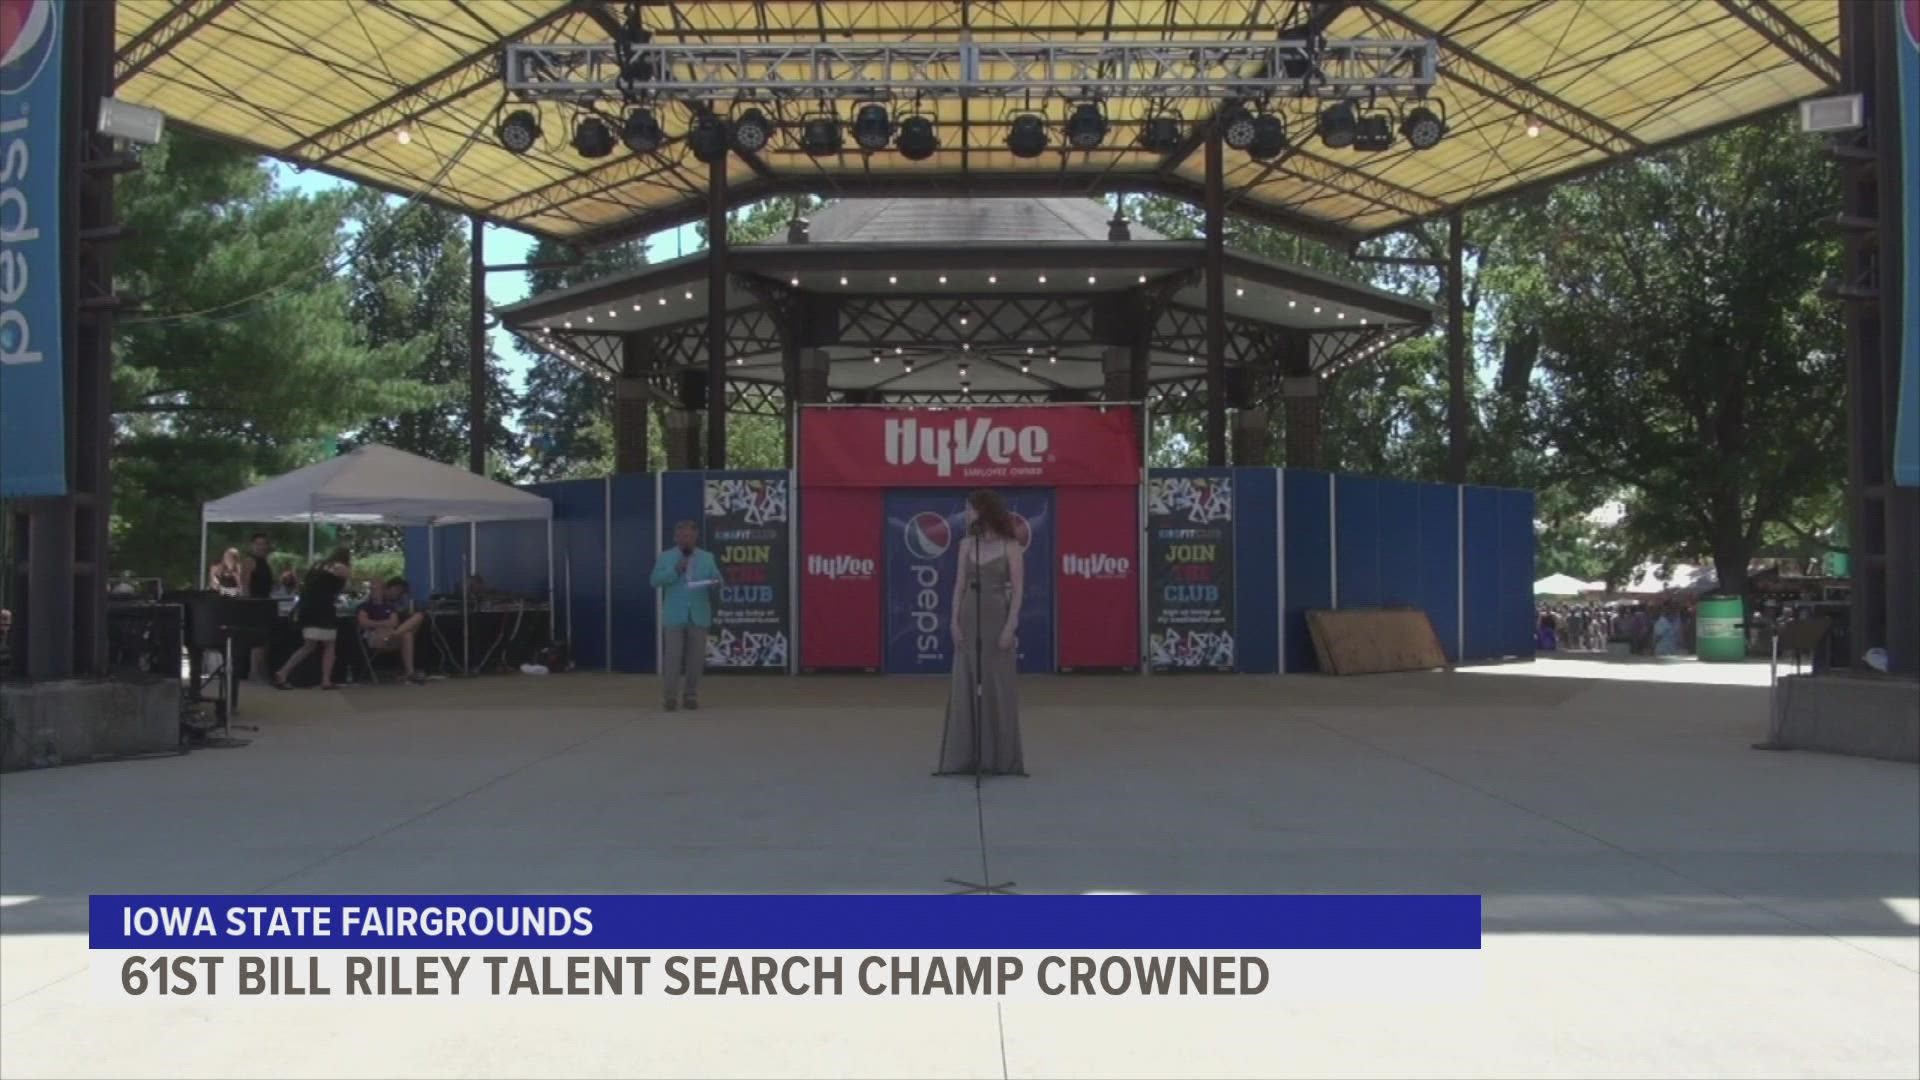 Bill Riley Talent Search champion crowned at 2021 Iowa State Fair